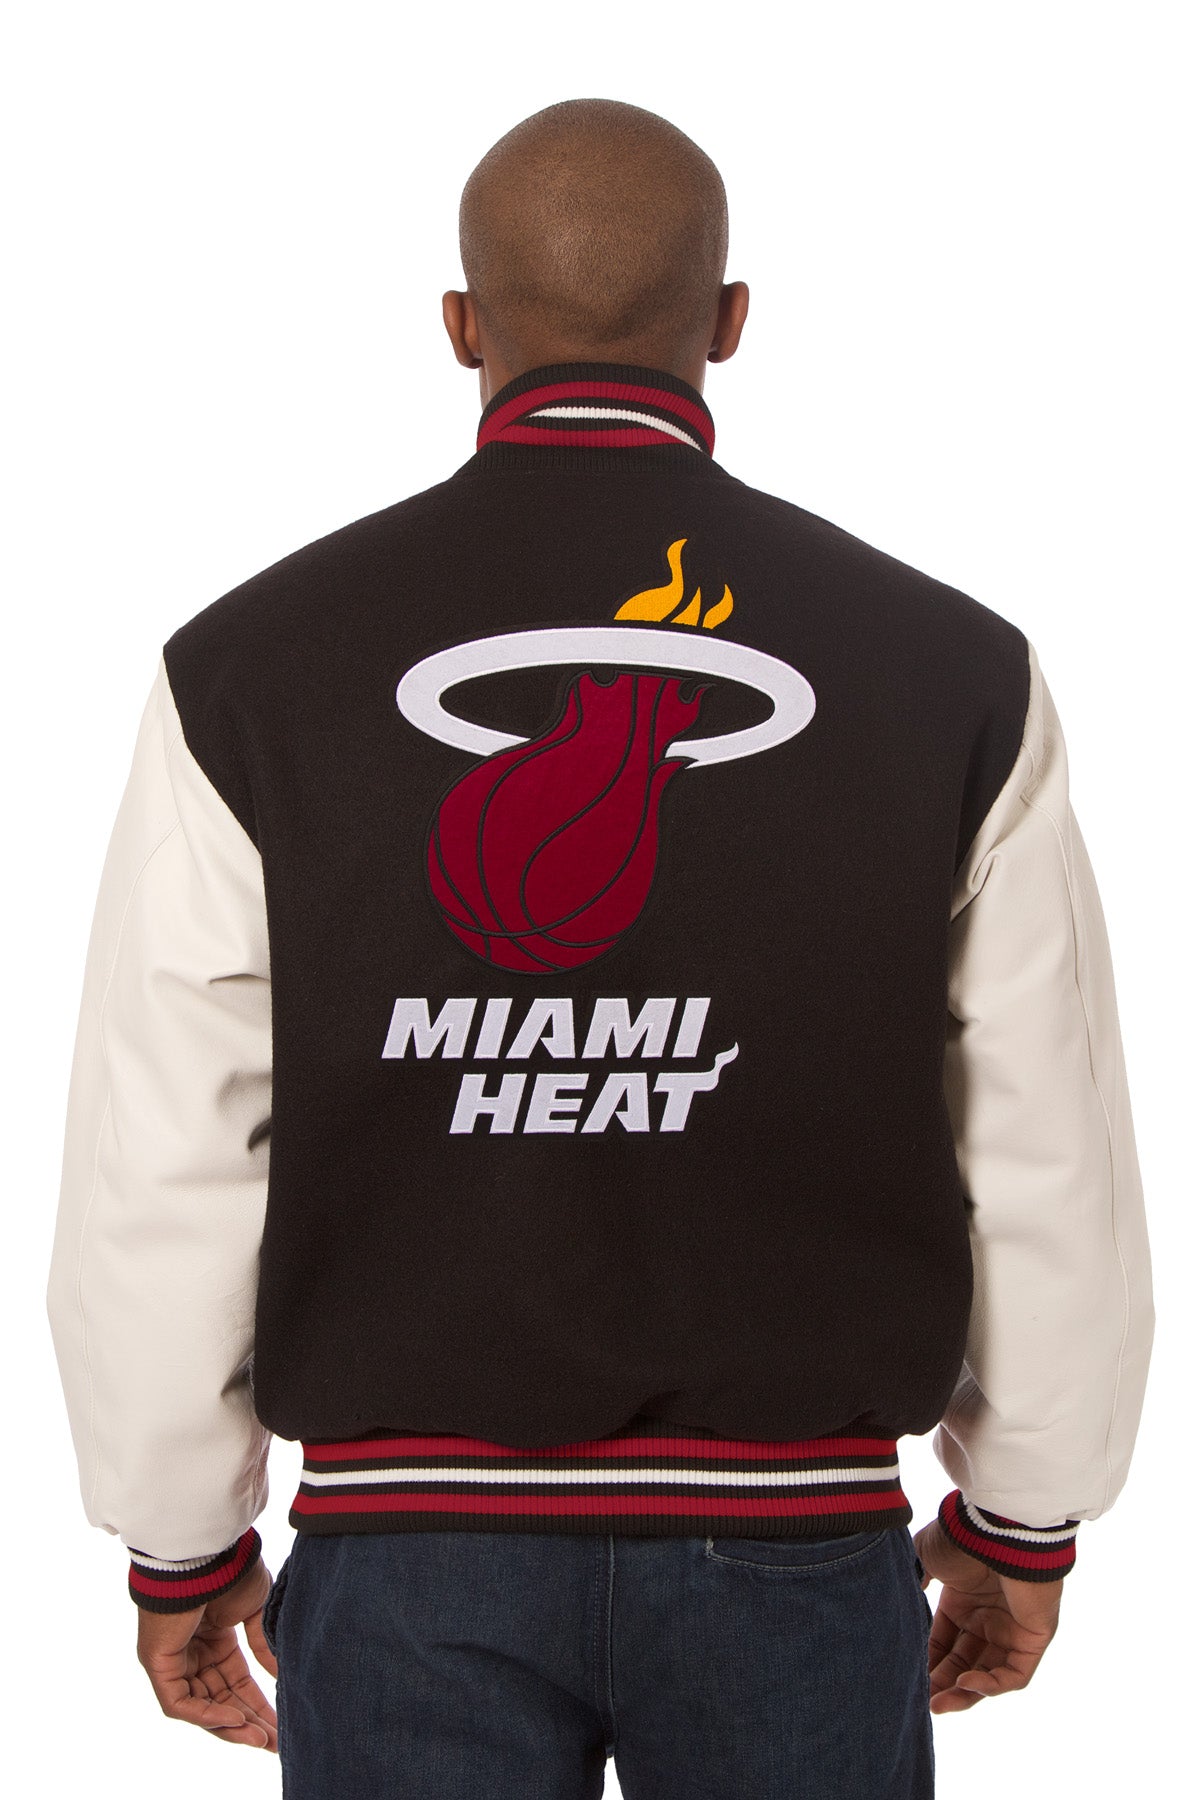 Miami Heat Embroidered Wool and Leather Jacket